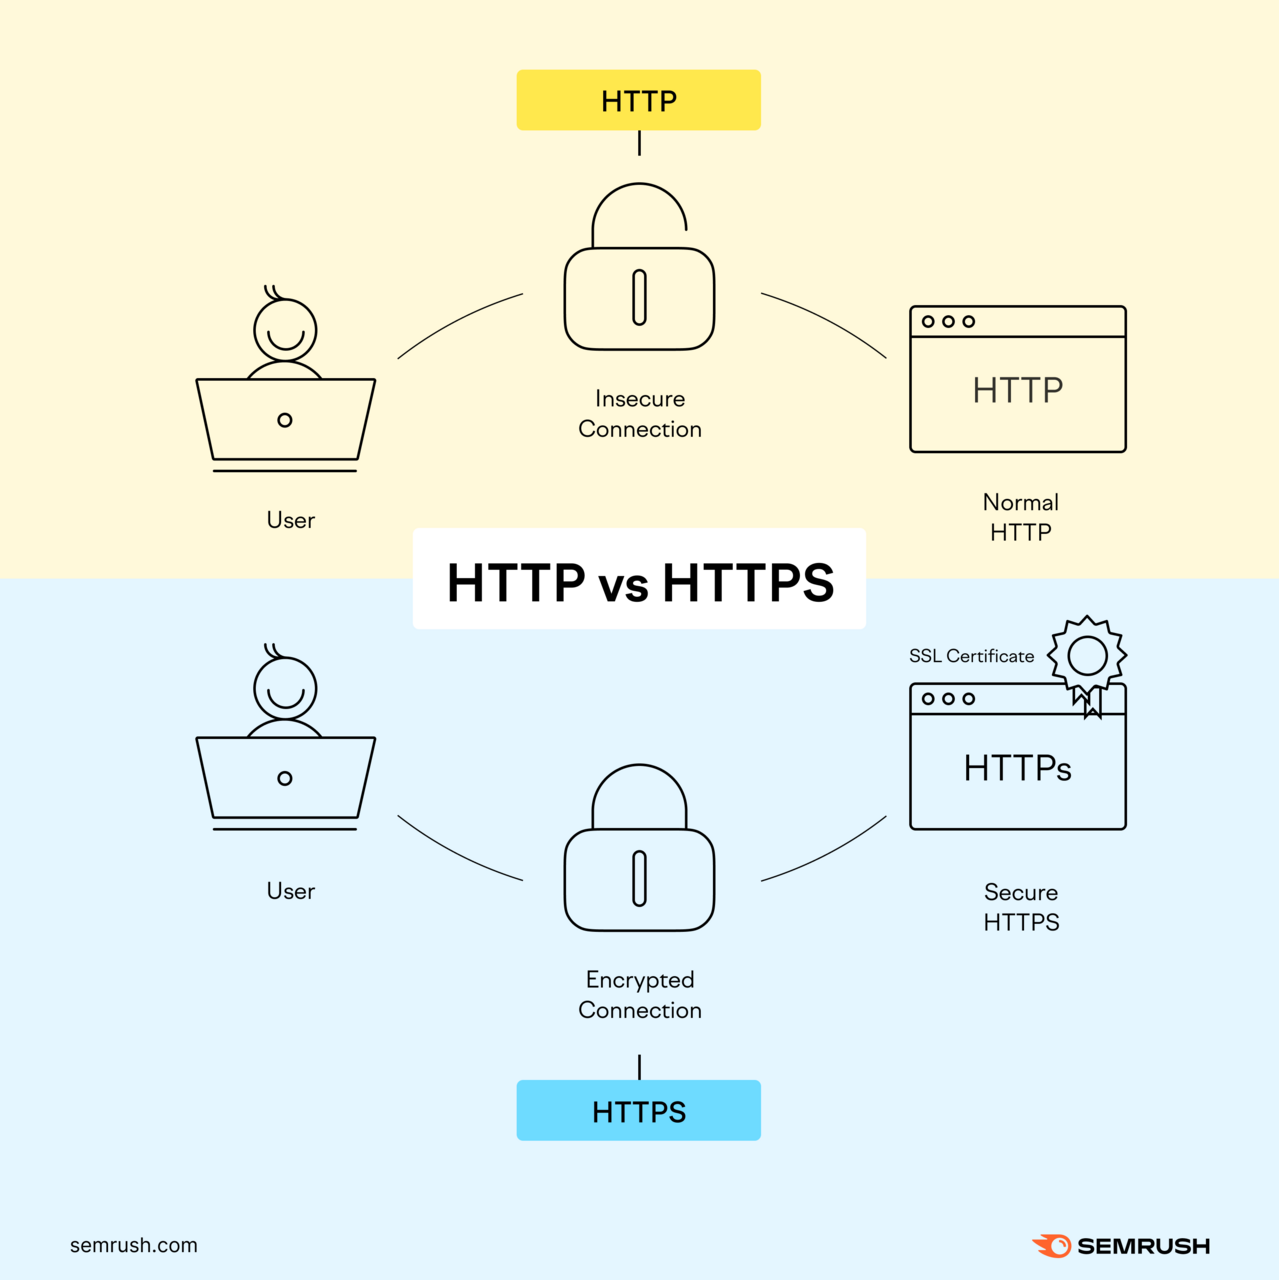 HTTP flow is user to insecure connection to normal HTTP. HTTPS flow is user to encrypted connection to secure HTTPS.